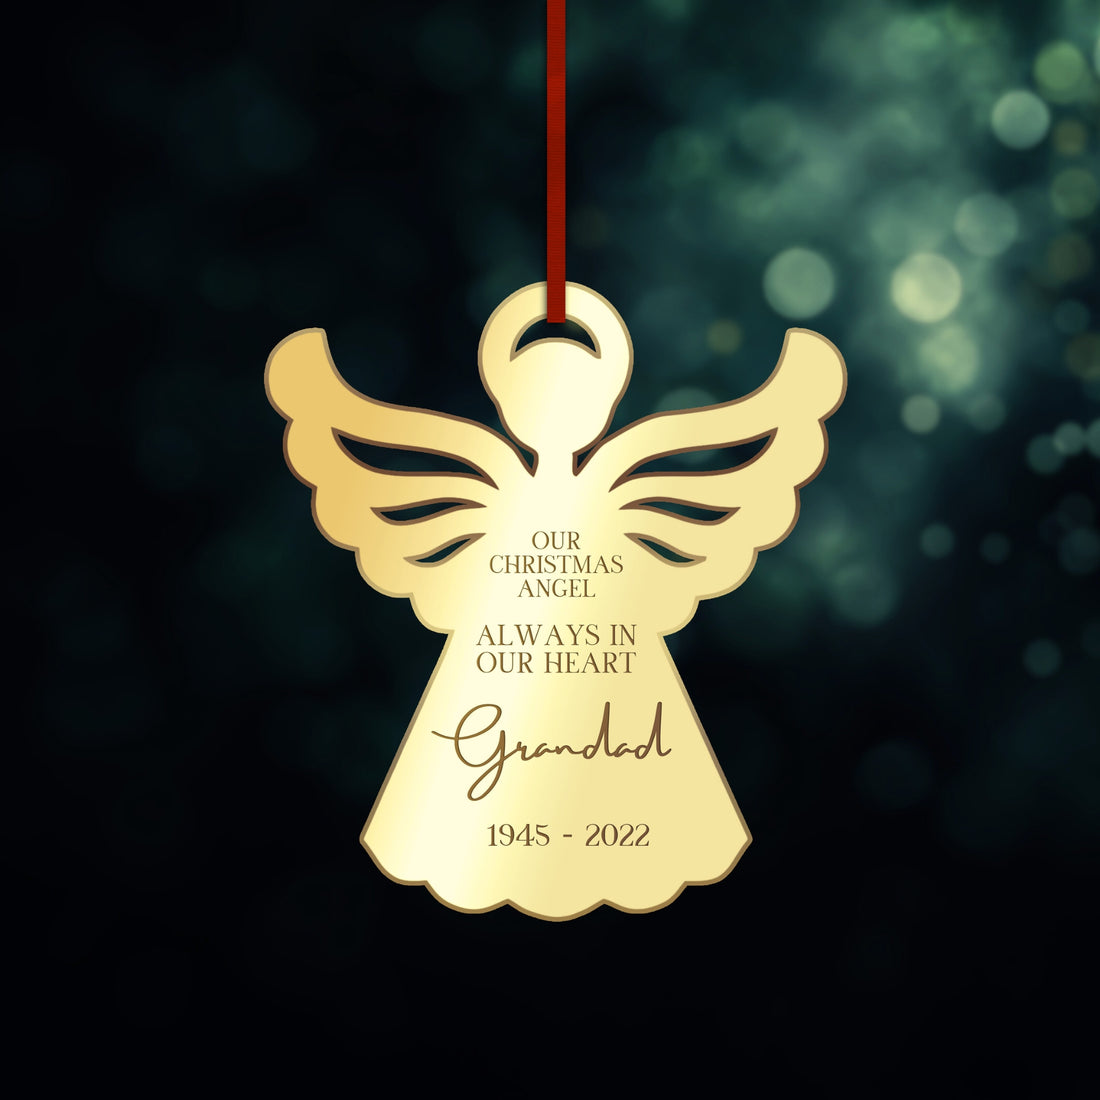 Personalised Angel Christmas Tree Ornament, Heaven Memorial Mirror Acrylic Engraved Custom Name Forever In Our Heart, In Loving Xmas Baubles